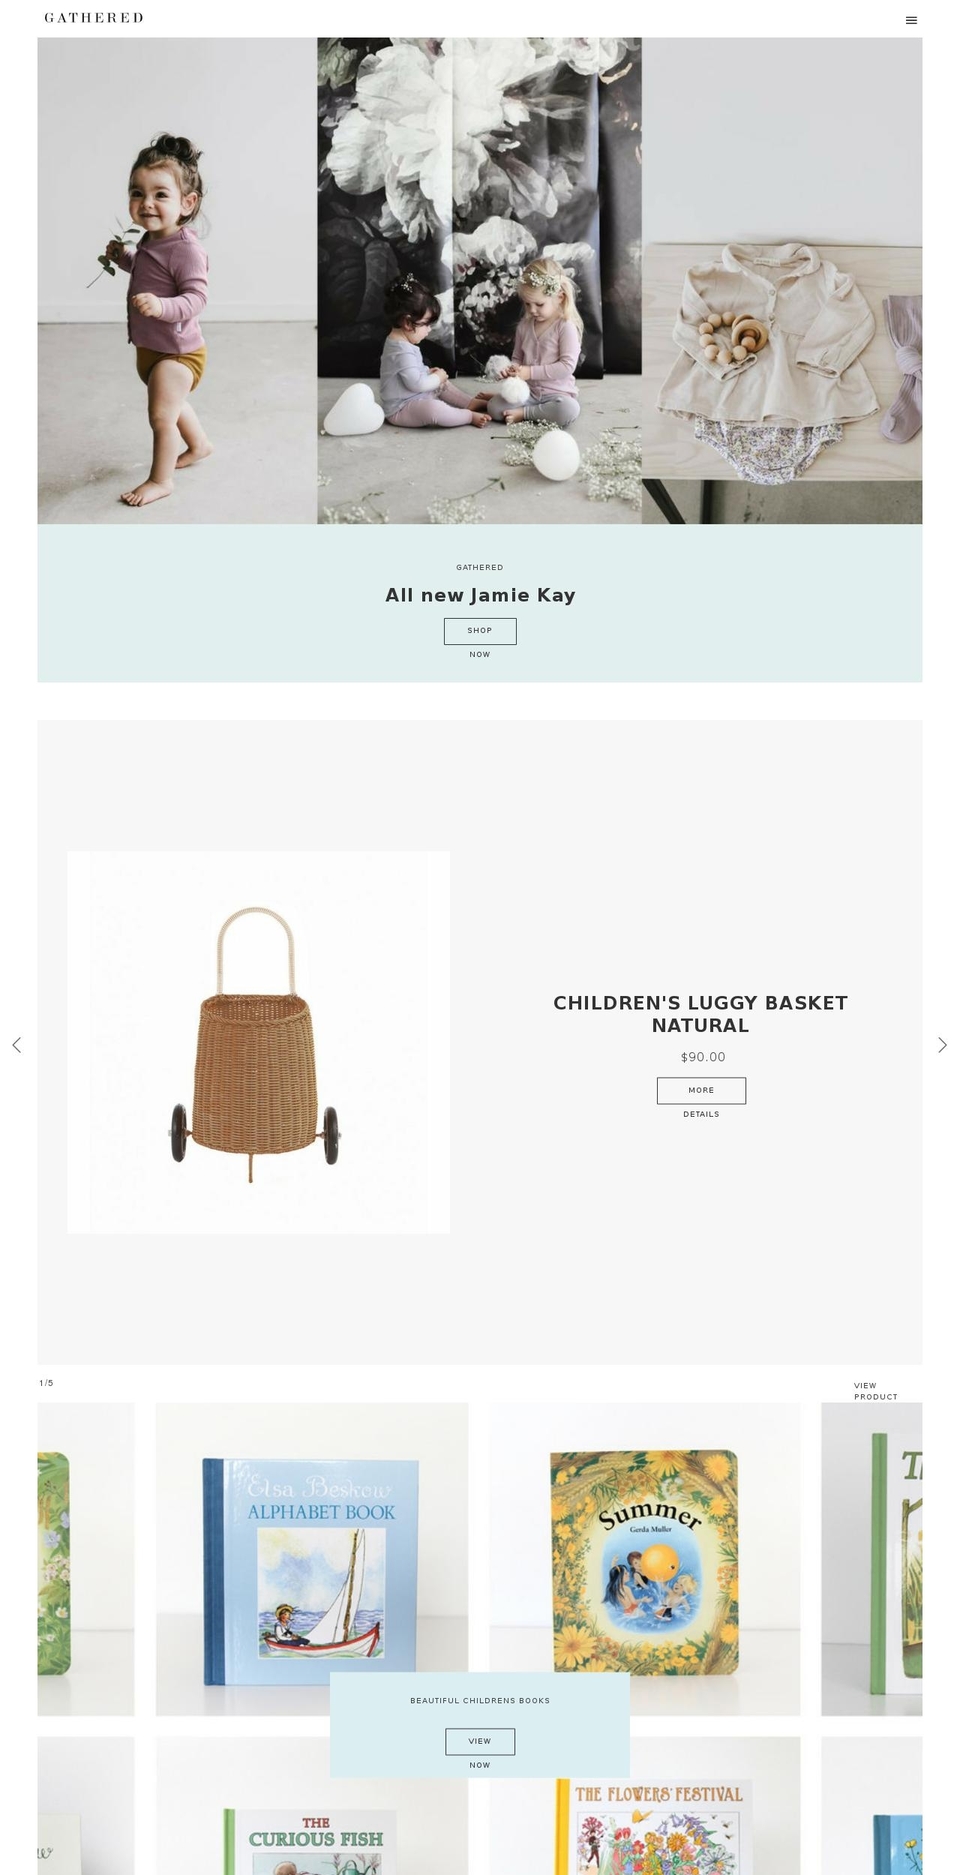 Craft Shopify theme site example gathered.nz